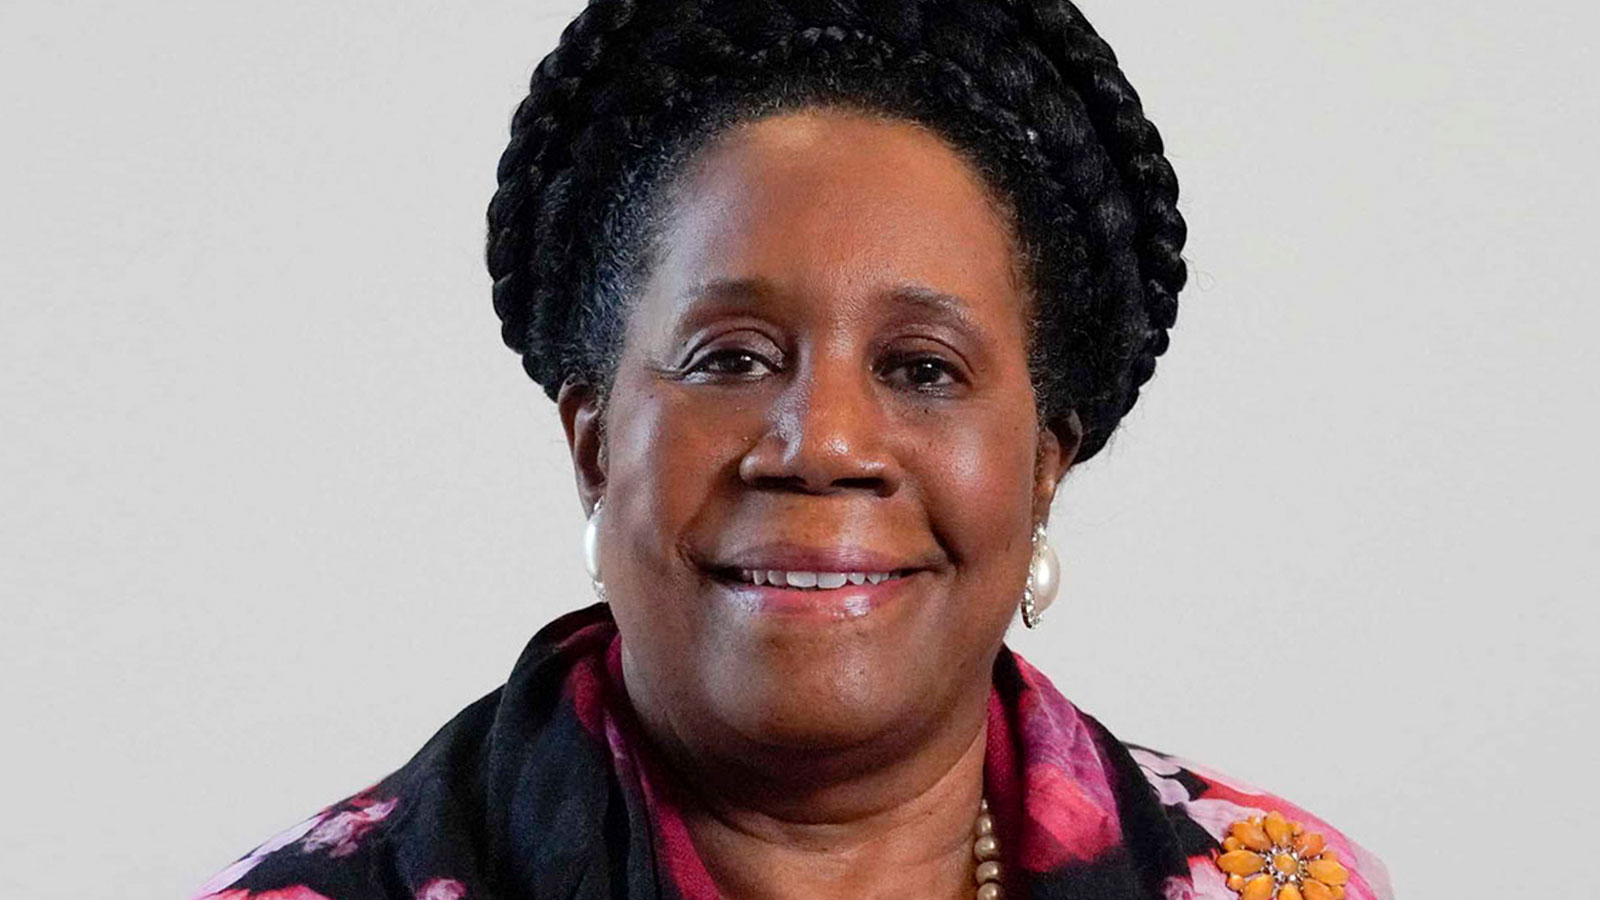 Rep. Sheila Jackson Lee: “House Has Votes to Pass Reparations Bill”